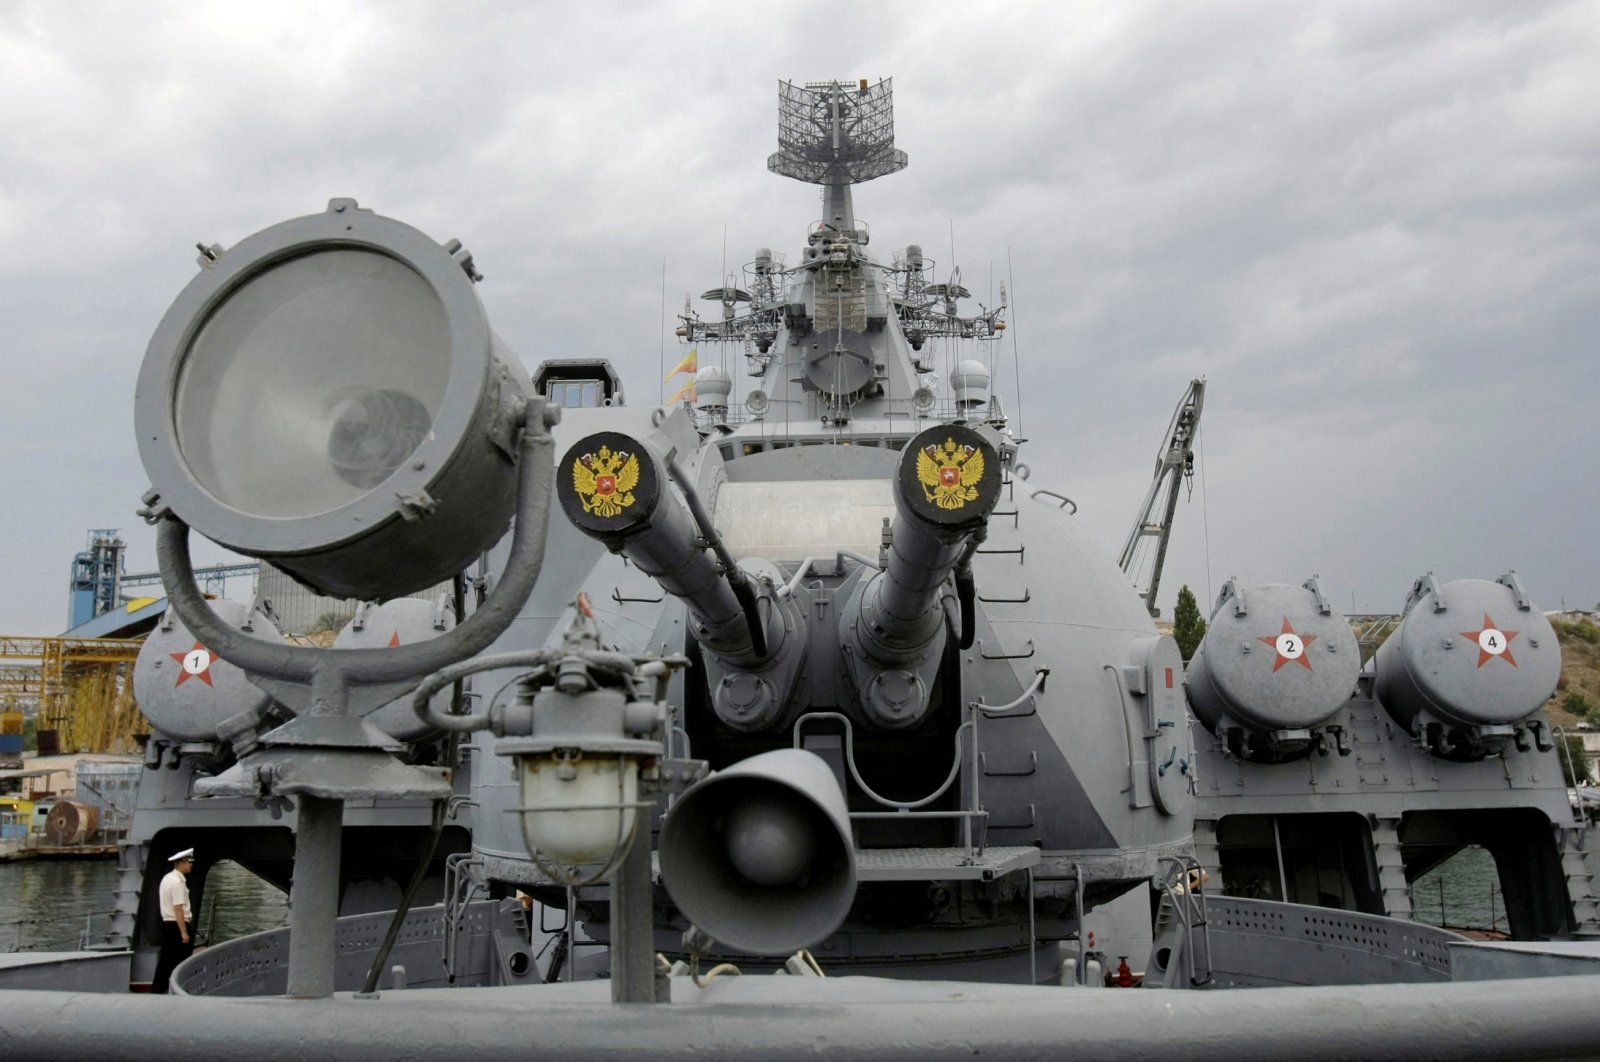 Russia&#039;s coat of arms, the double headed eagle, is seen on covers of the Moskva missile cruiser in the Black Sea port of Sevastopol, Crimea, Sept. 16, 2008. (Reuters Photo)